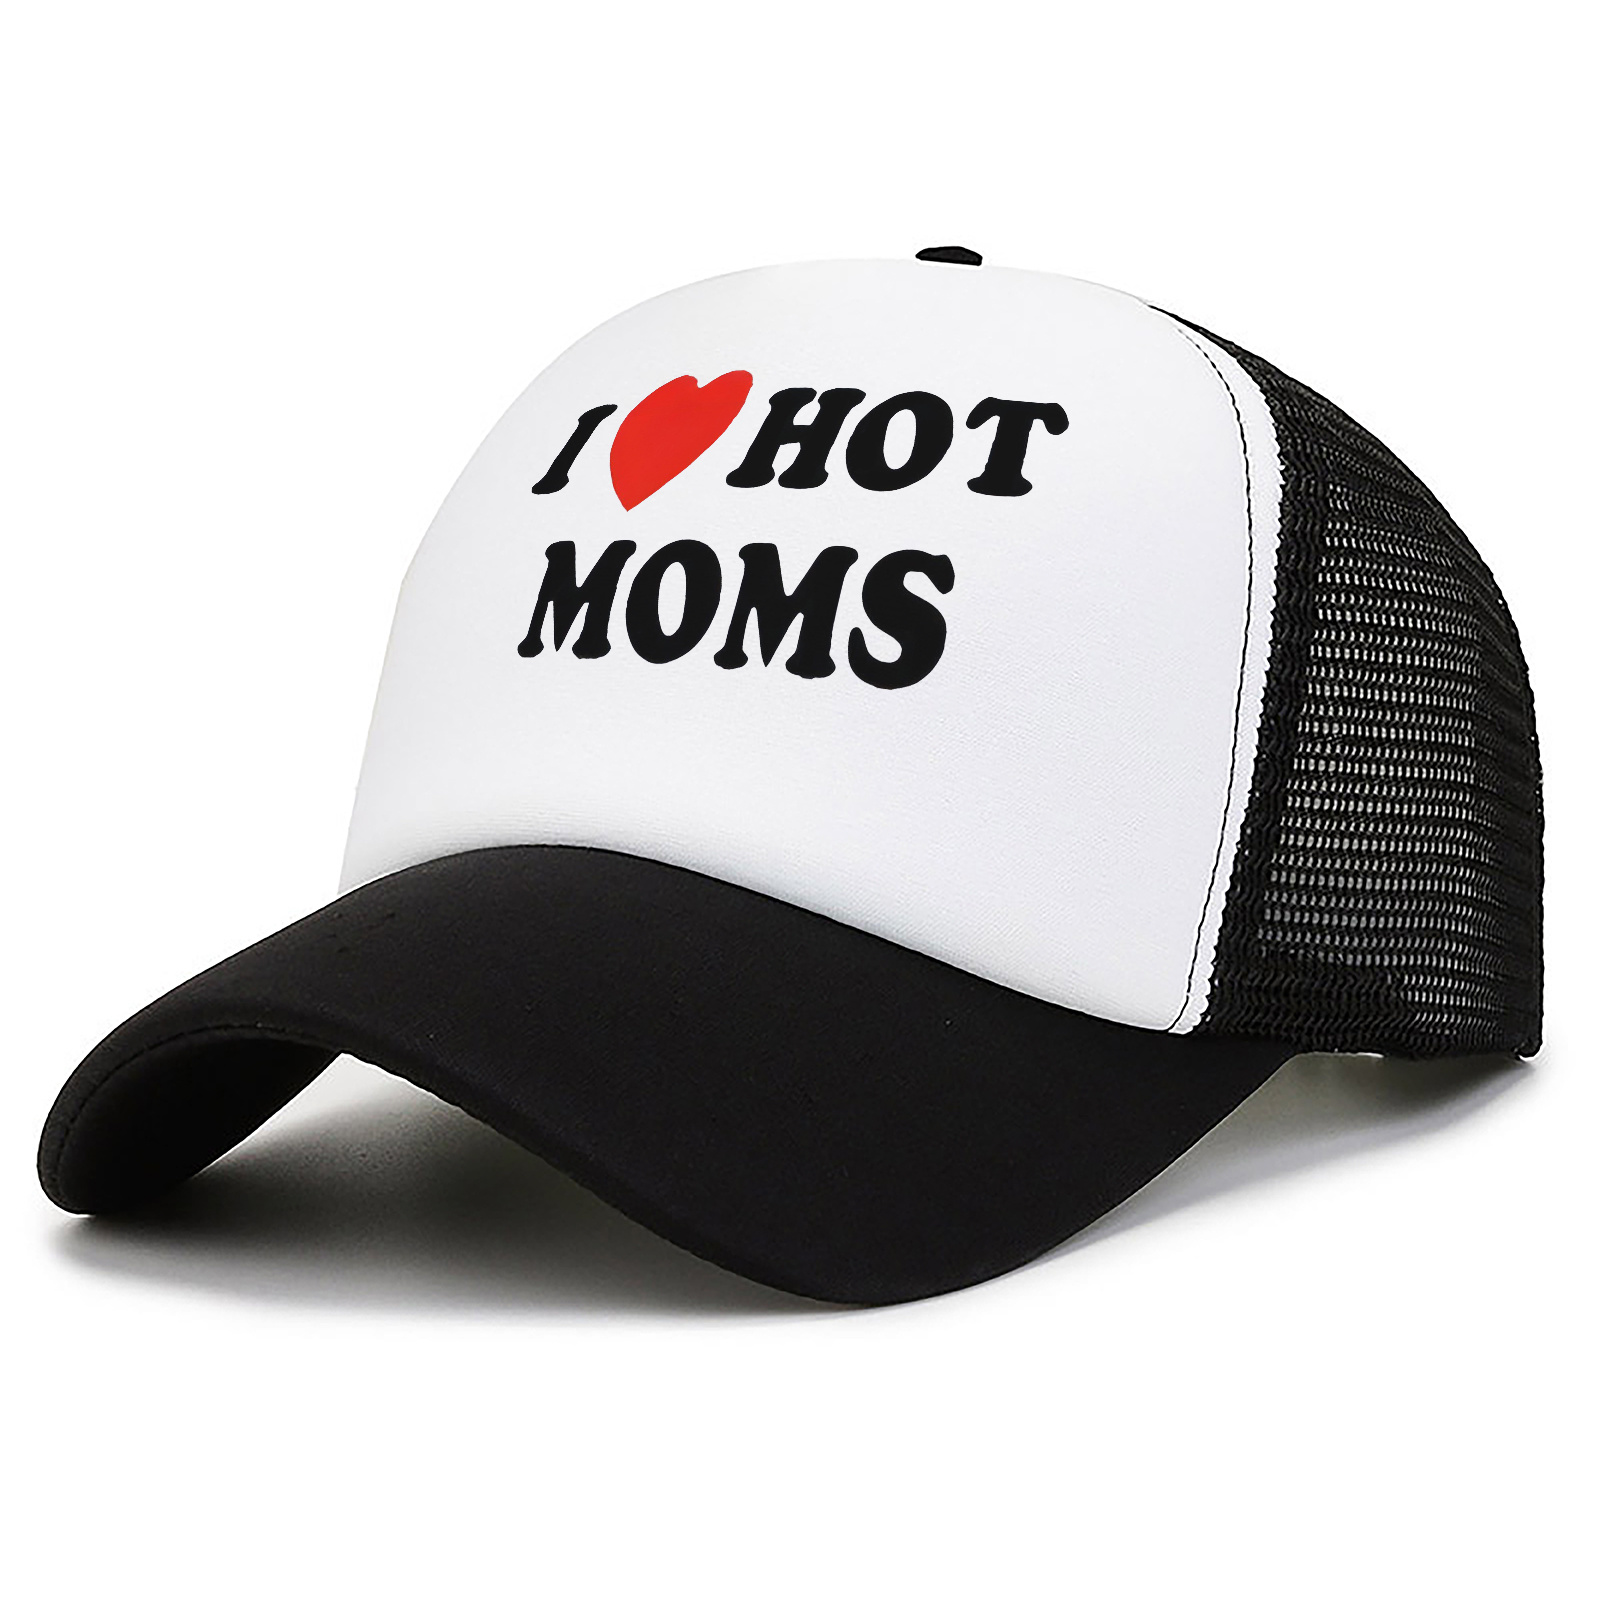 1pc Funny Trucker Hats, I Love Hot Moms Printed Hat, For Adults Adjustable Washable Baseball Fishing Caps, Novelty Gift Outdoor Sport Caps For